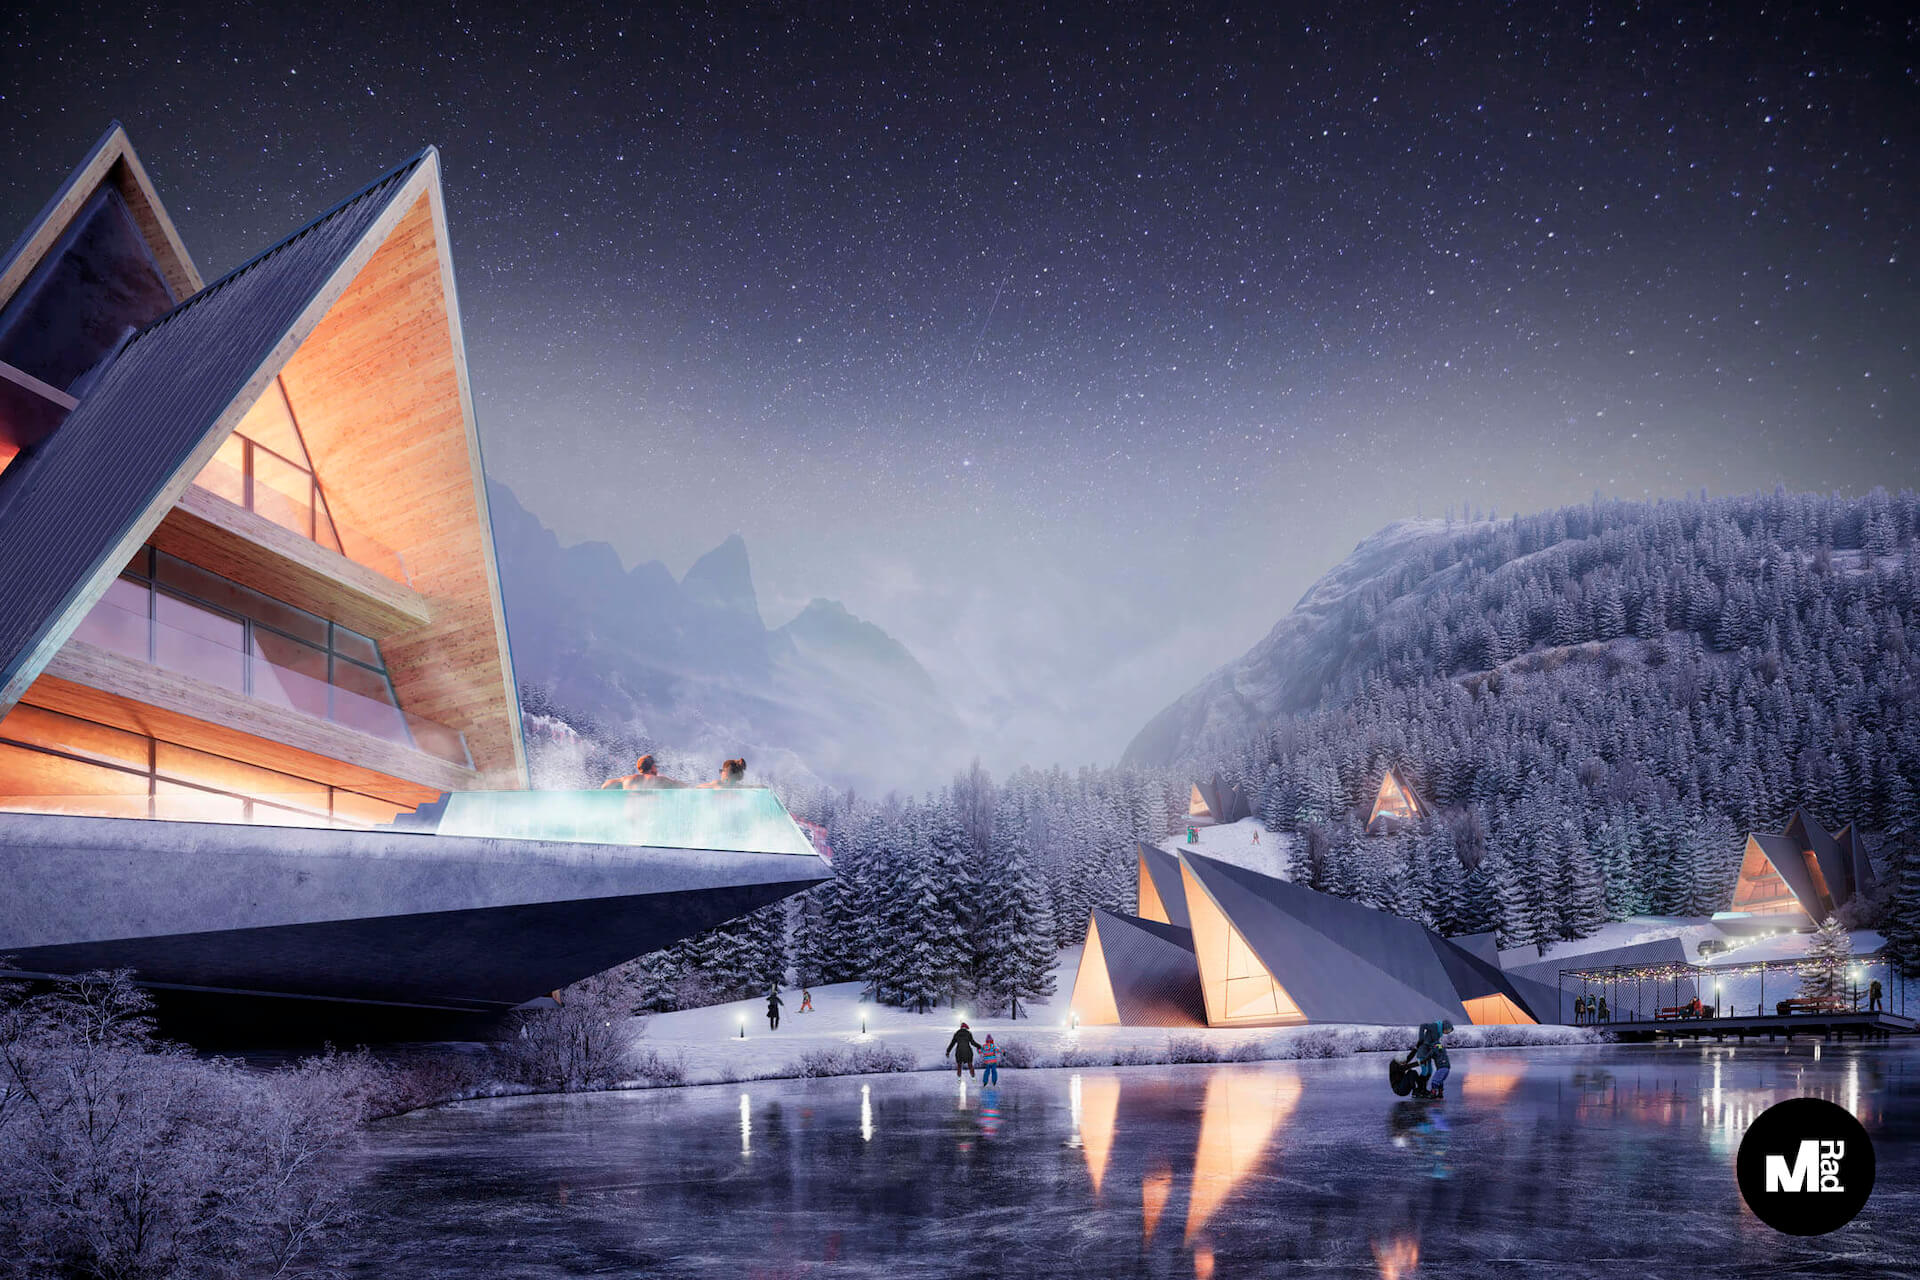 Photorealistic CGI of a Lake Resort Concept in Winter Setting